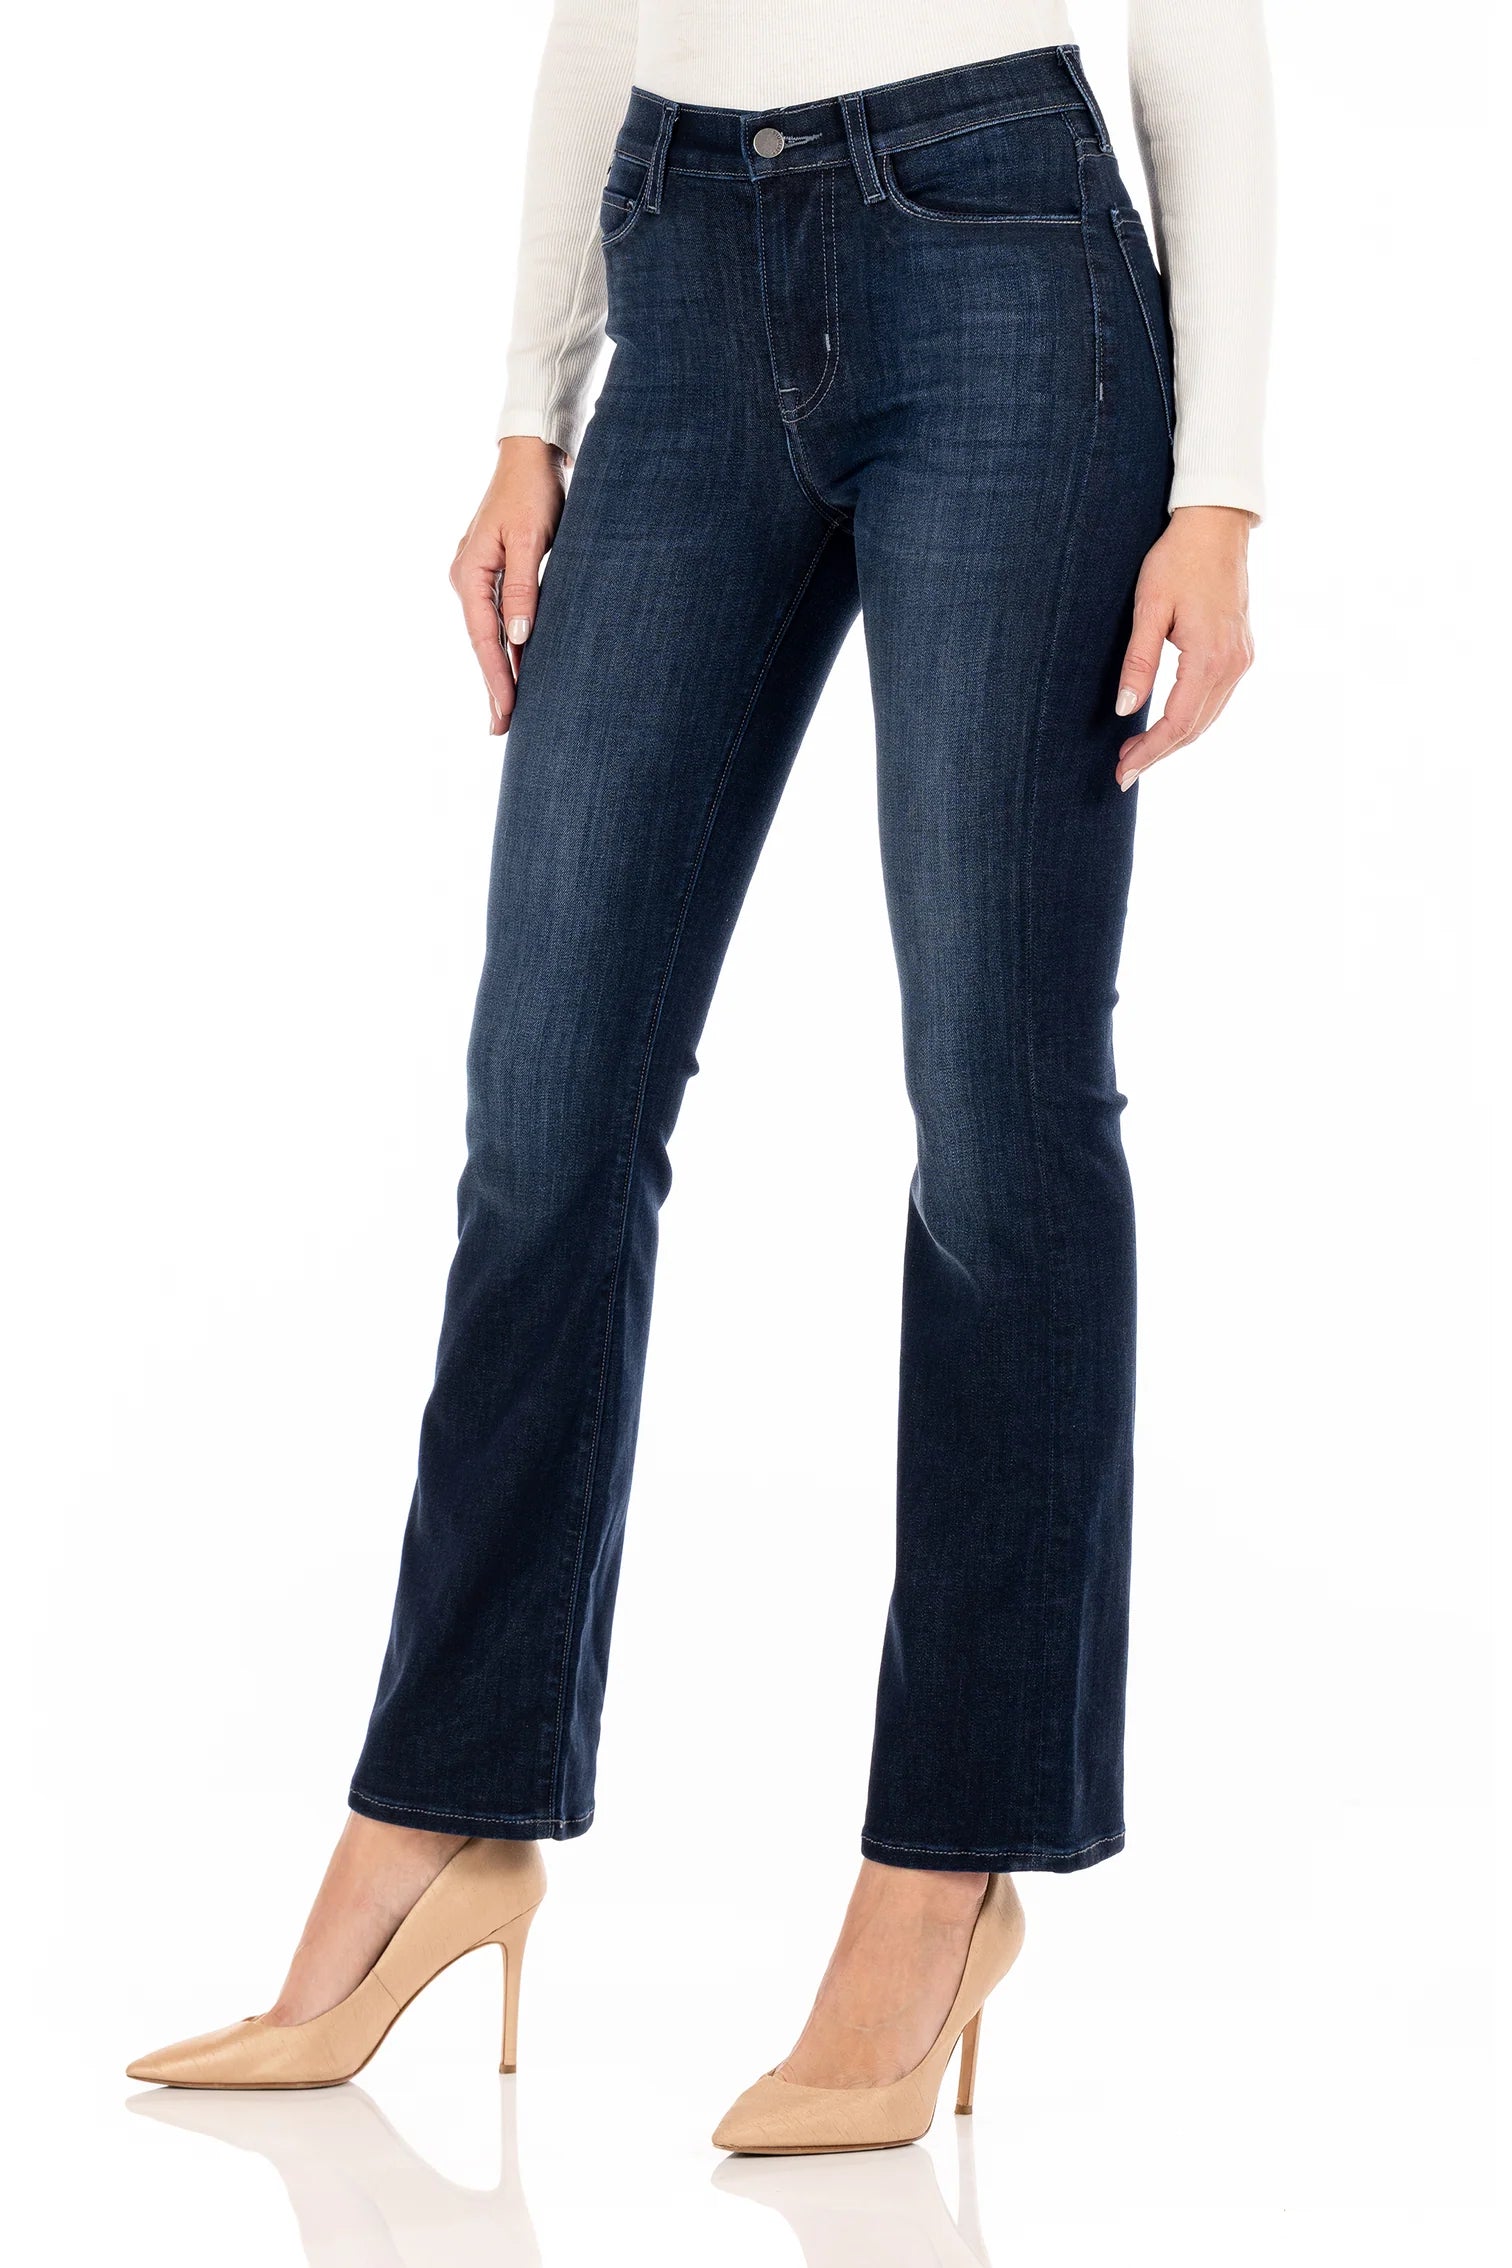 Fidelity Lily High Rise Skinny Bootcut